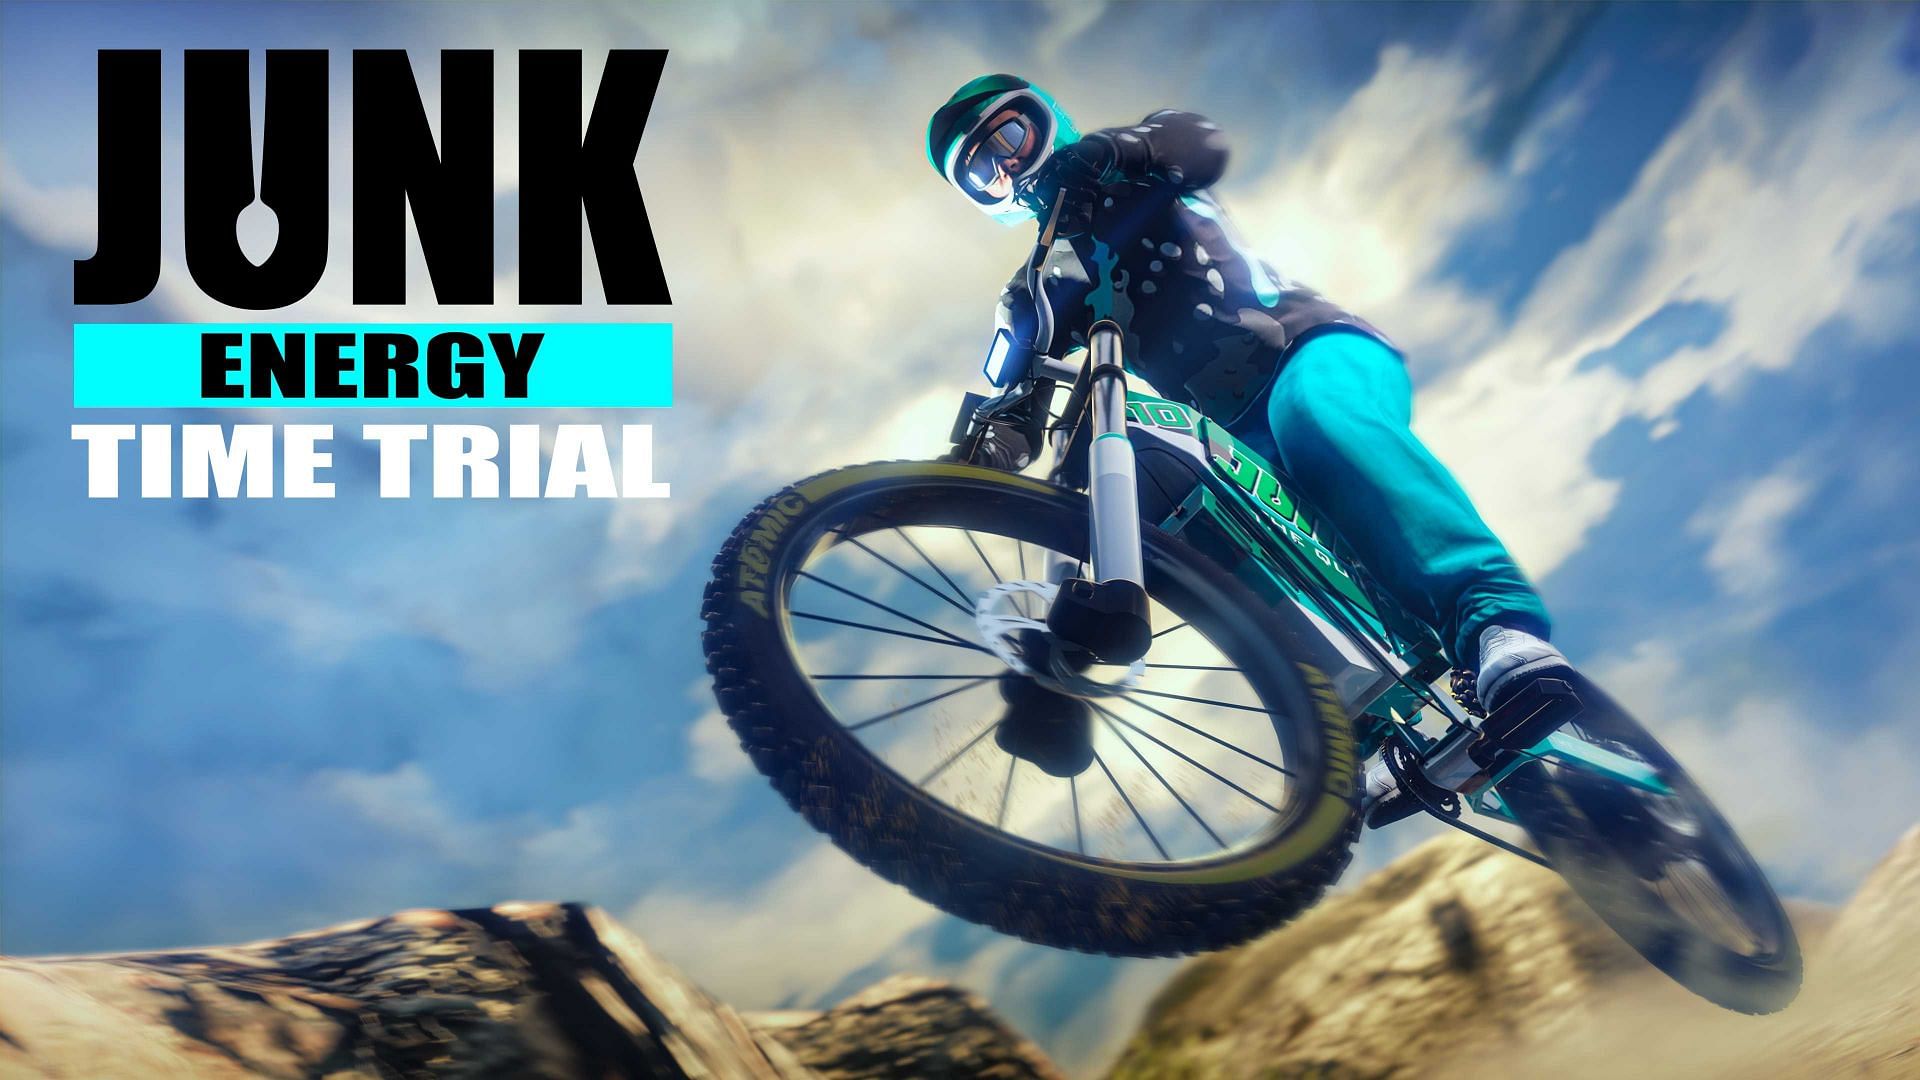 Official Junk Energy Time Trail poster (Image via Rockstar Games)